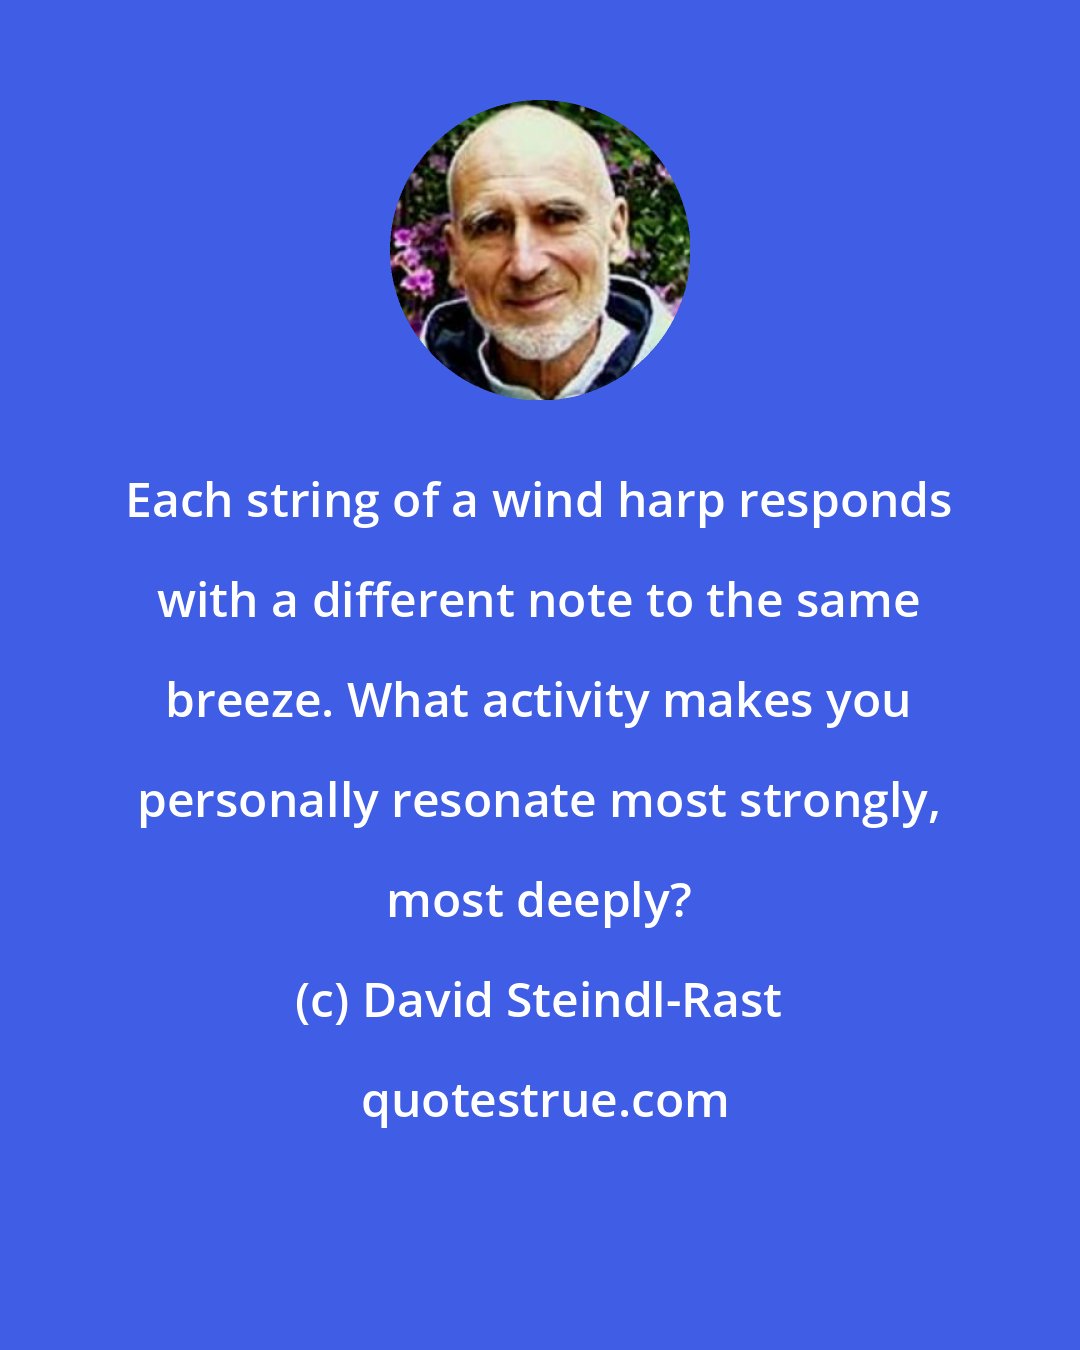 David Steindl-Rast: Each string of a wind harp responds with a different note to the same breeze. What activity makes you personally resonate most strongly, most deeply?